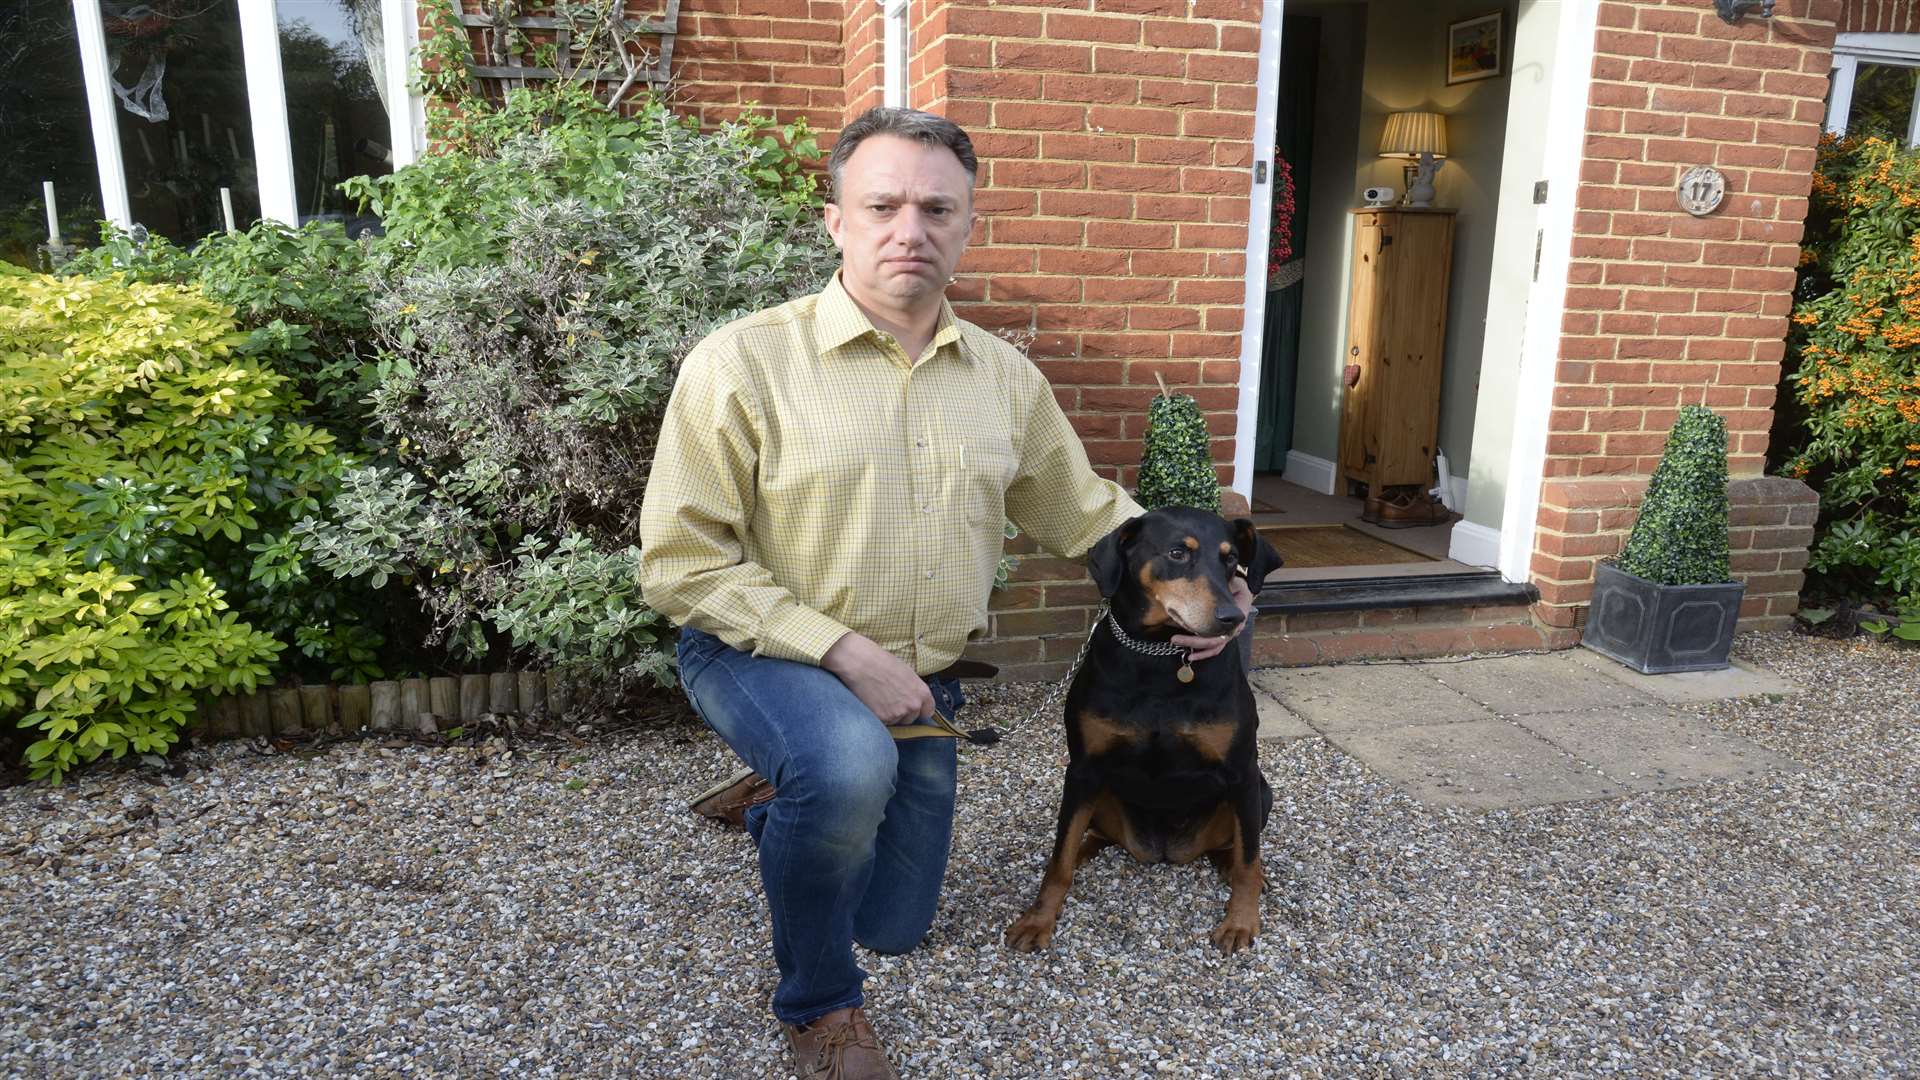 Michael Johnson with his dog Zara at home in Chestfield